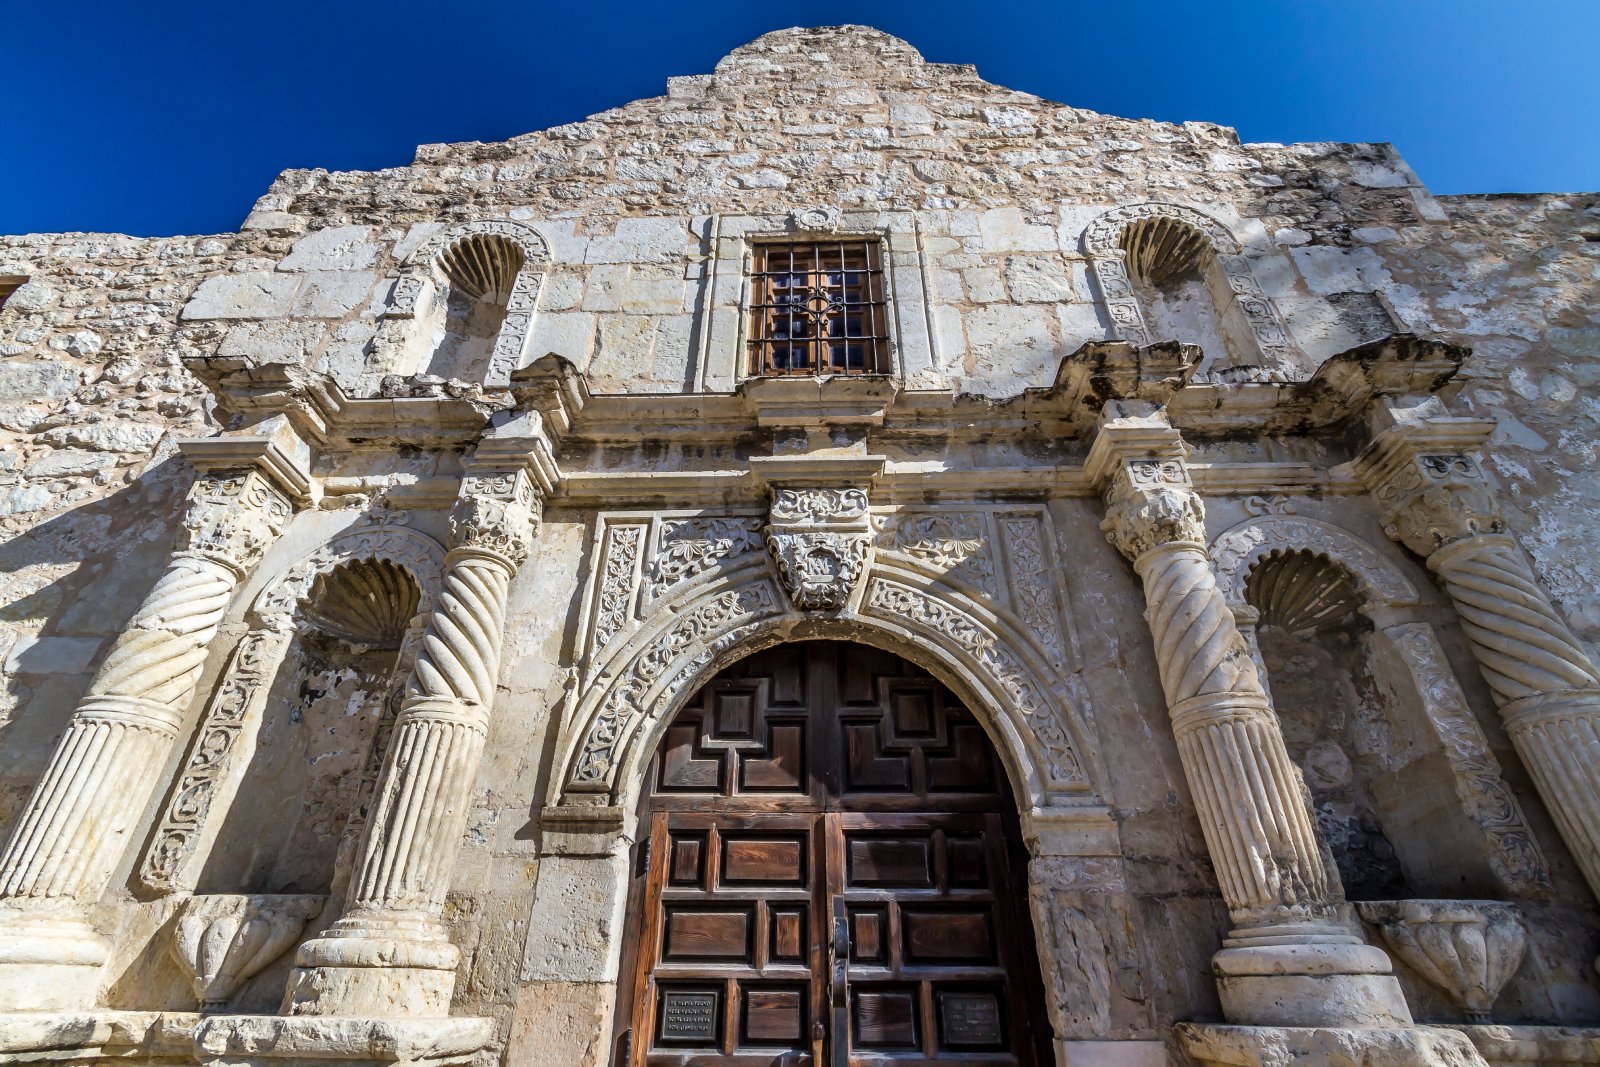 <p><span>Remember the Alamo? This pivotal site in San Antonio tells the story of Texas’ fight for independence from Mexico. It’s a free, must-visit historical site that offers a glimpse into the Texan spirit of resilience and freedom.</span></p>